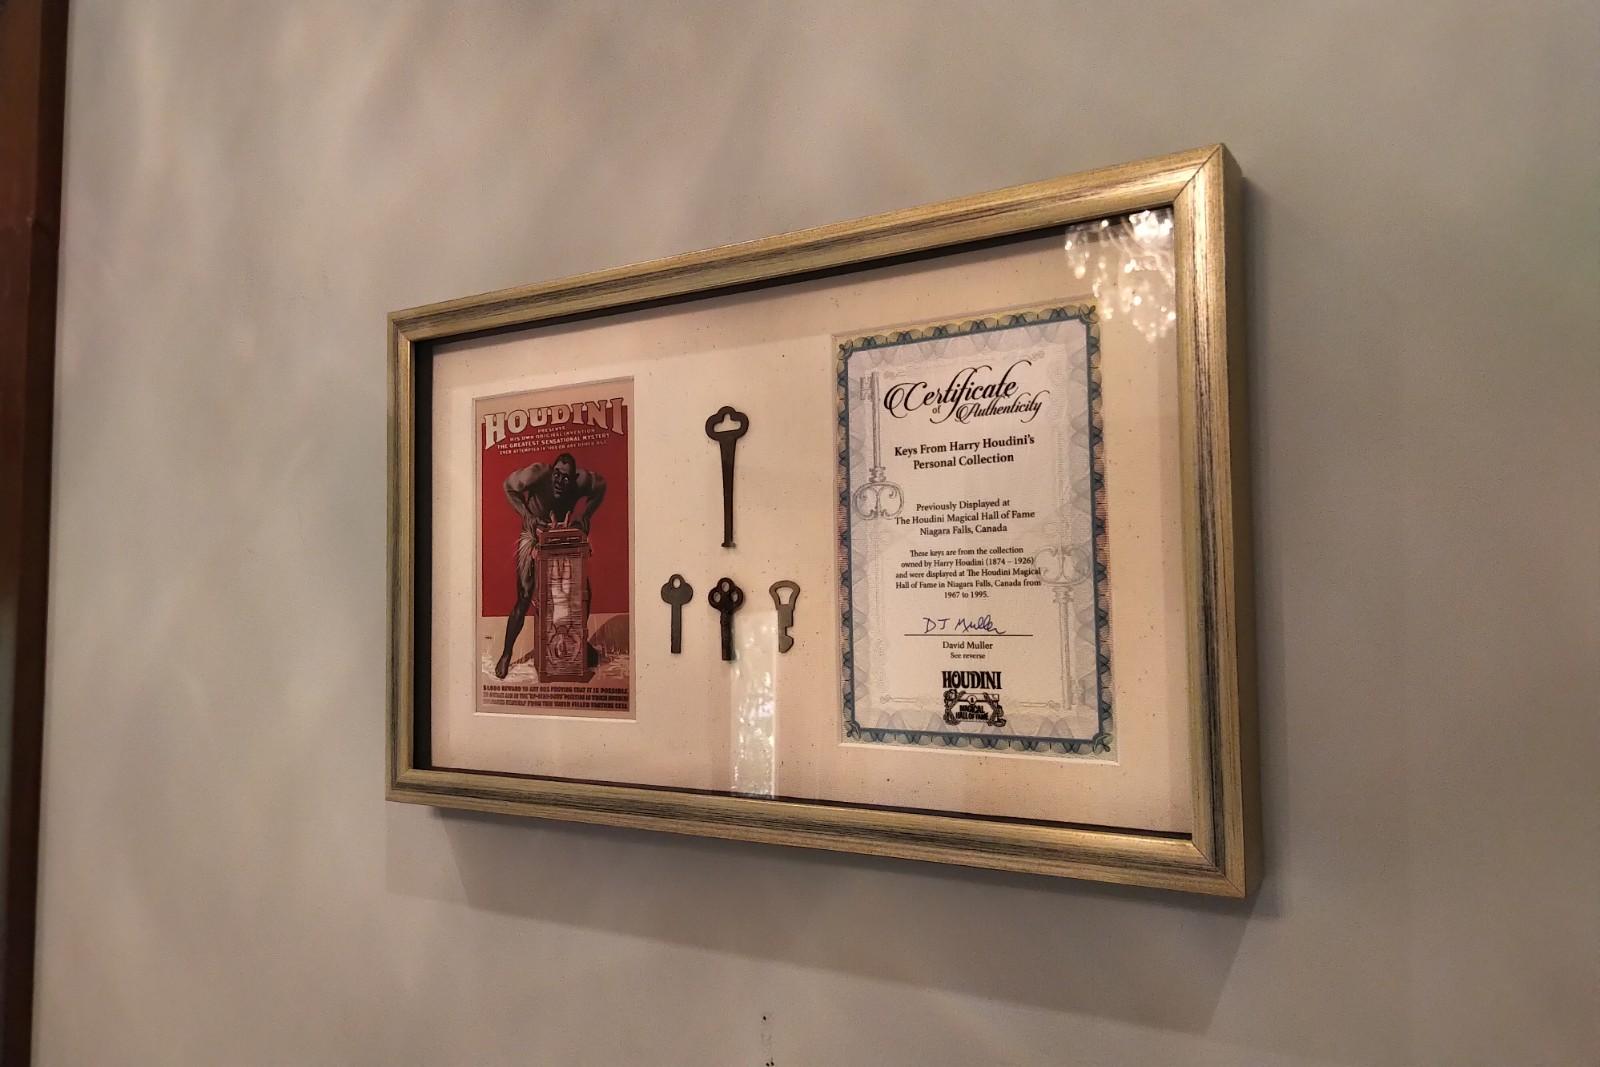 Original Houdini Keys from Houdini Museum with Certificate of Authenticity 2